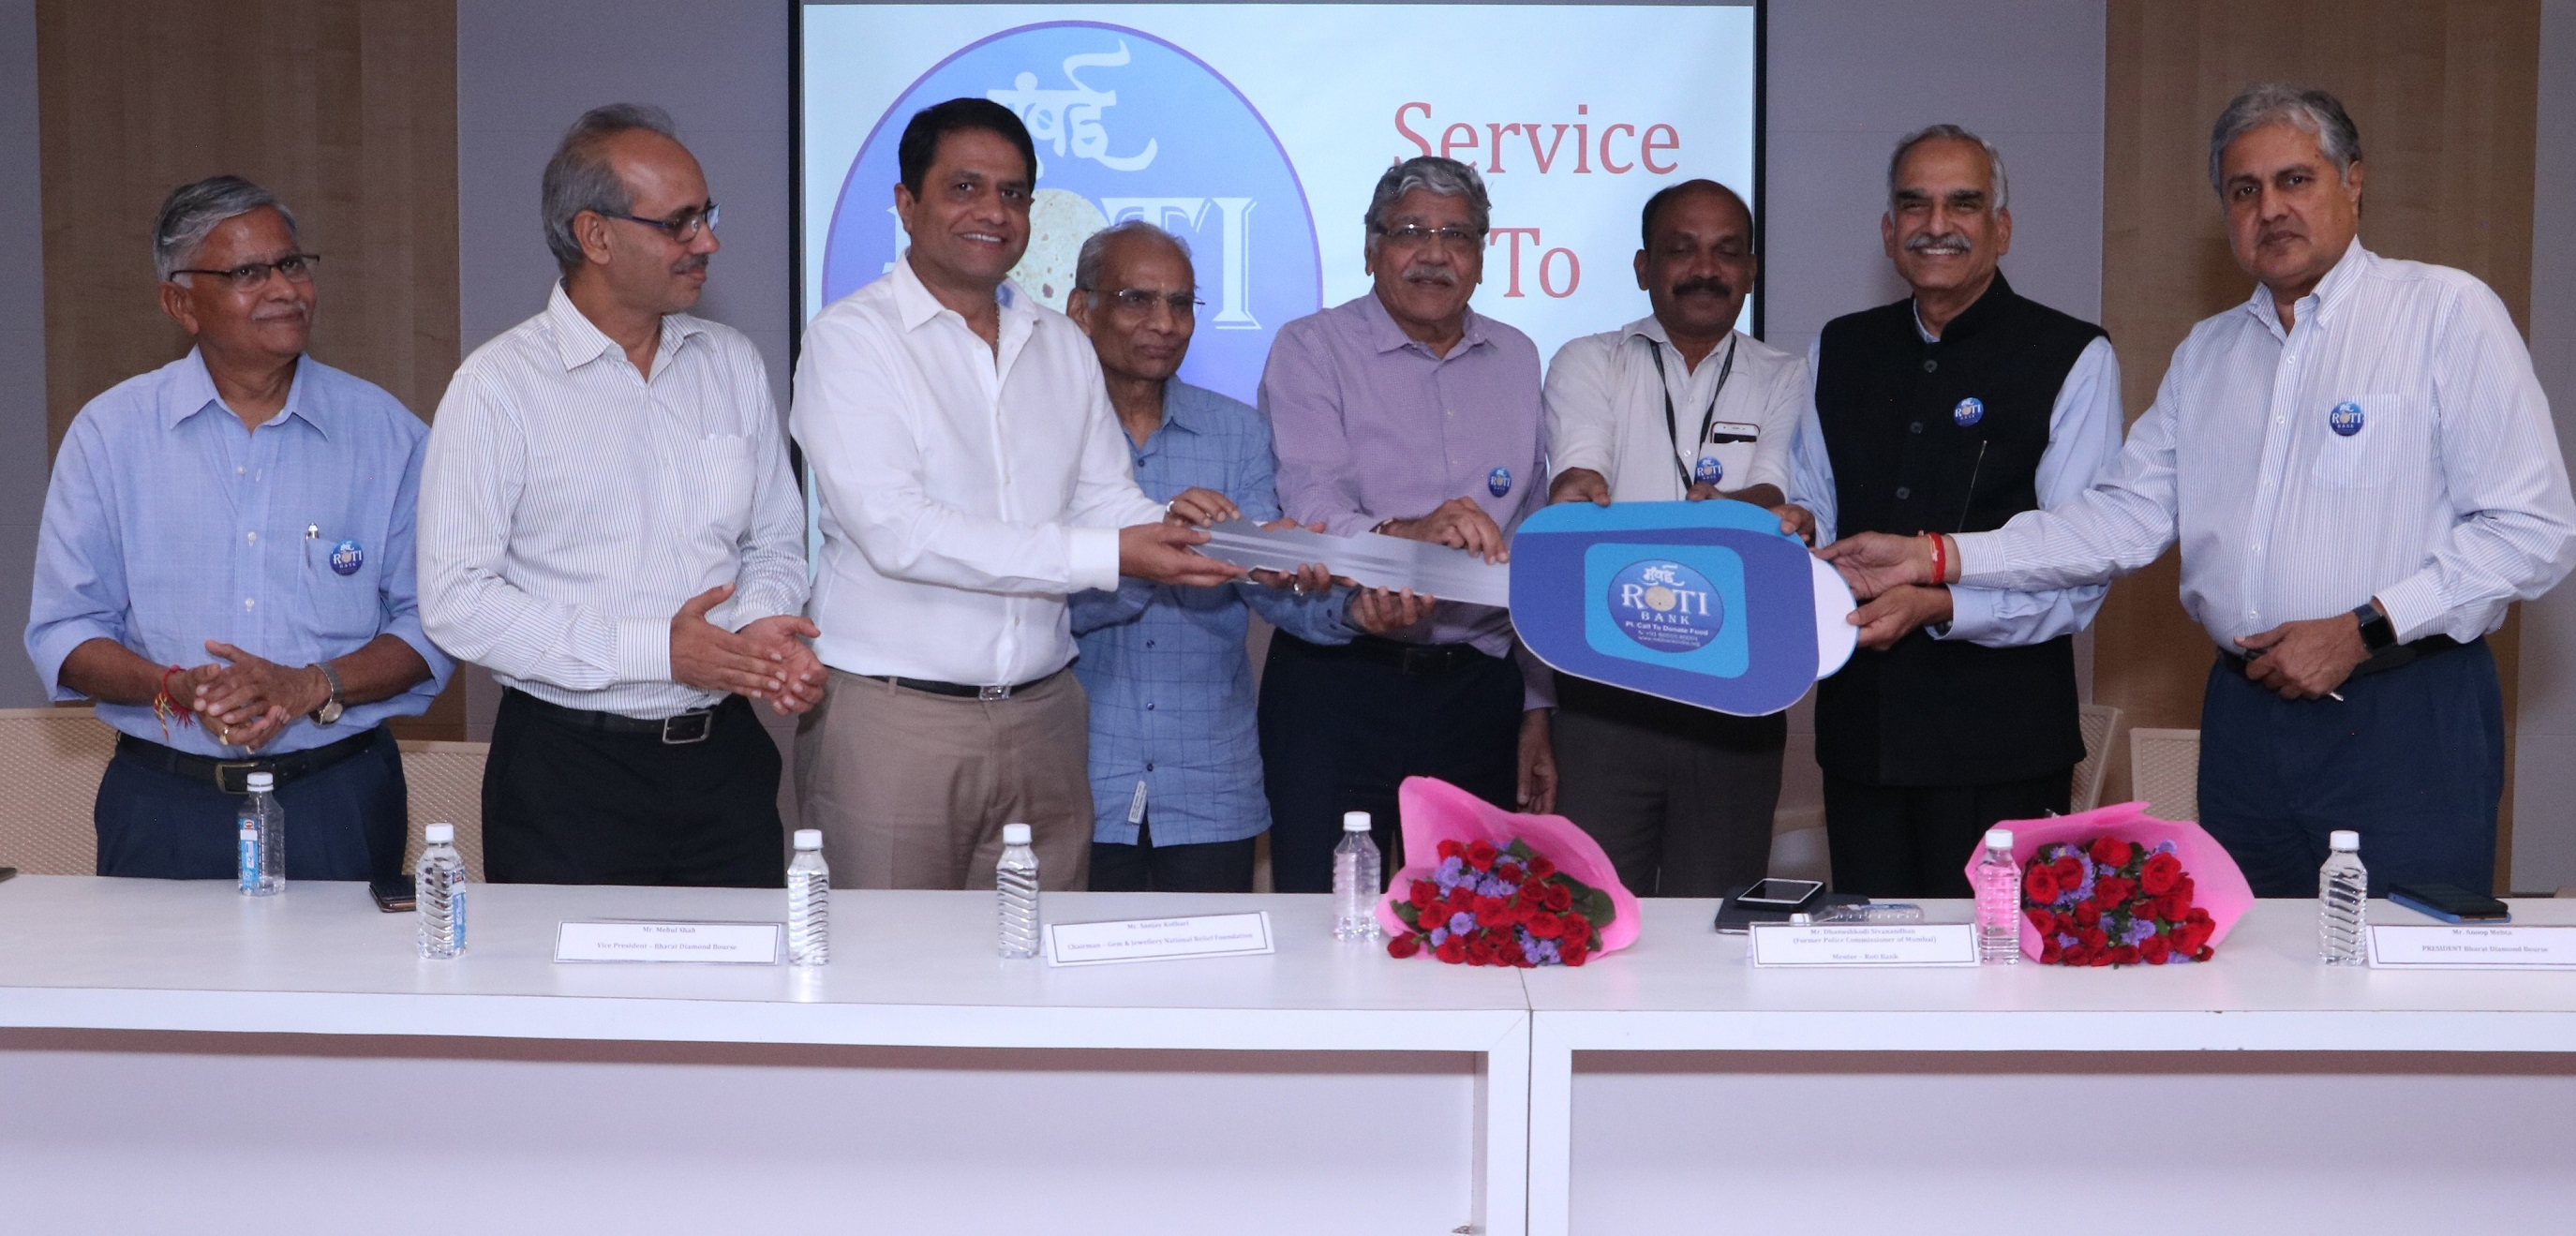 Mr Anoop Mehta, President, Bharat Diamond Bourse, Mr Sanjay Kothari, Chairman, Gems and Jewellery National Relief Foundation (GJNRF), Mr Kirit Bhansali, Member BDB and GJNRF, along with other dignitaries at a function held at the Bharat Diamond Bourse (BDB) in Mumbai to donate 2 vans to the Roti Bank, a non-profit organisation which thrives to make the city free of hunger and excess food to be delivered to the needy people. Shri D Sivanandhan, Mentor Roti Bank, former Commissioner of Police, Mumbai receiving the van keys.- Photo By GPN